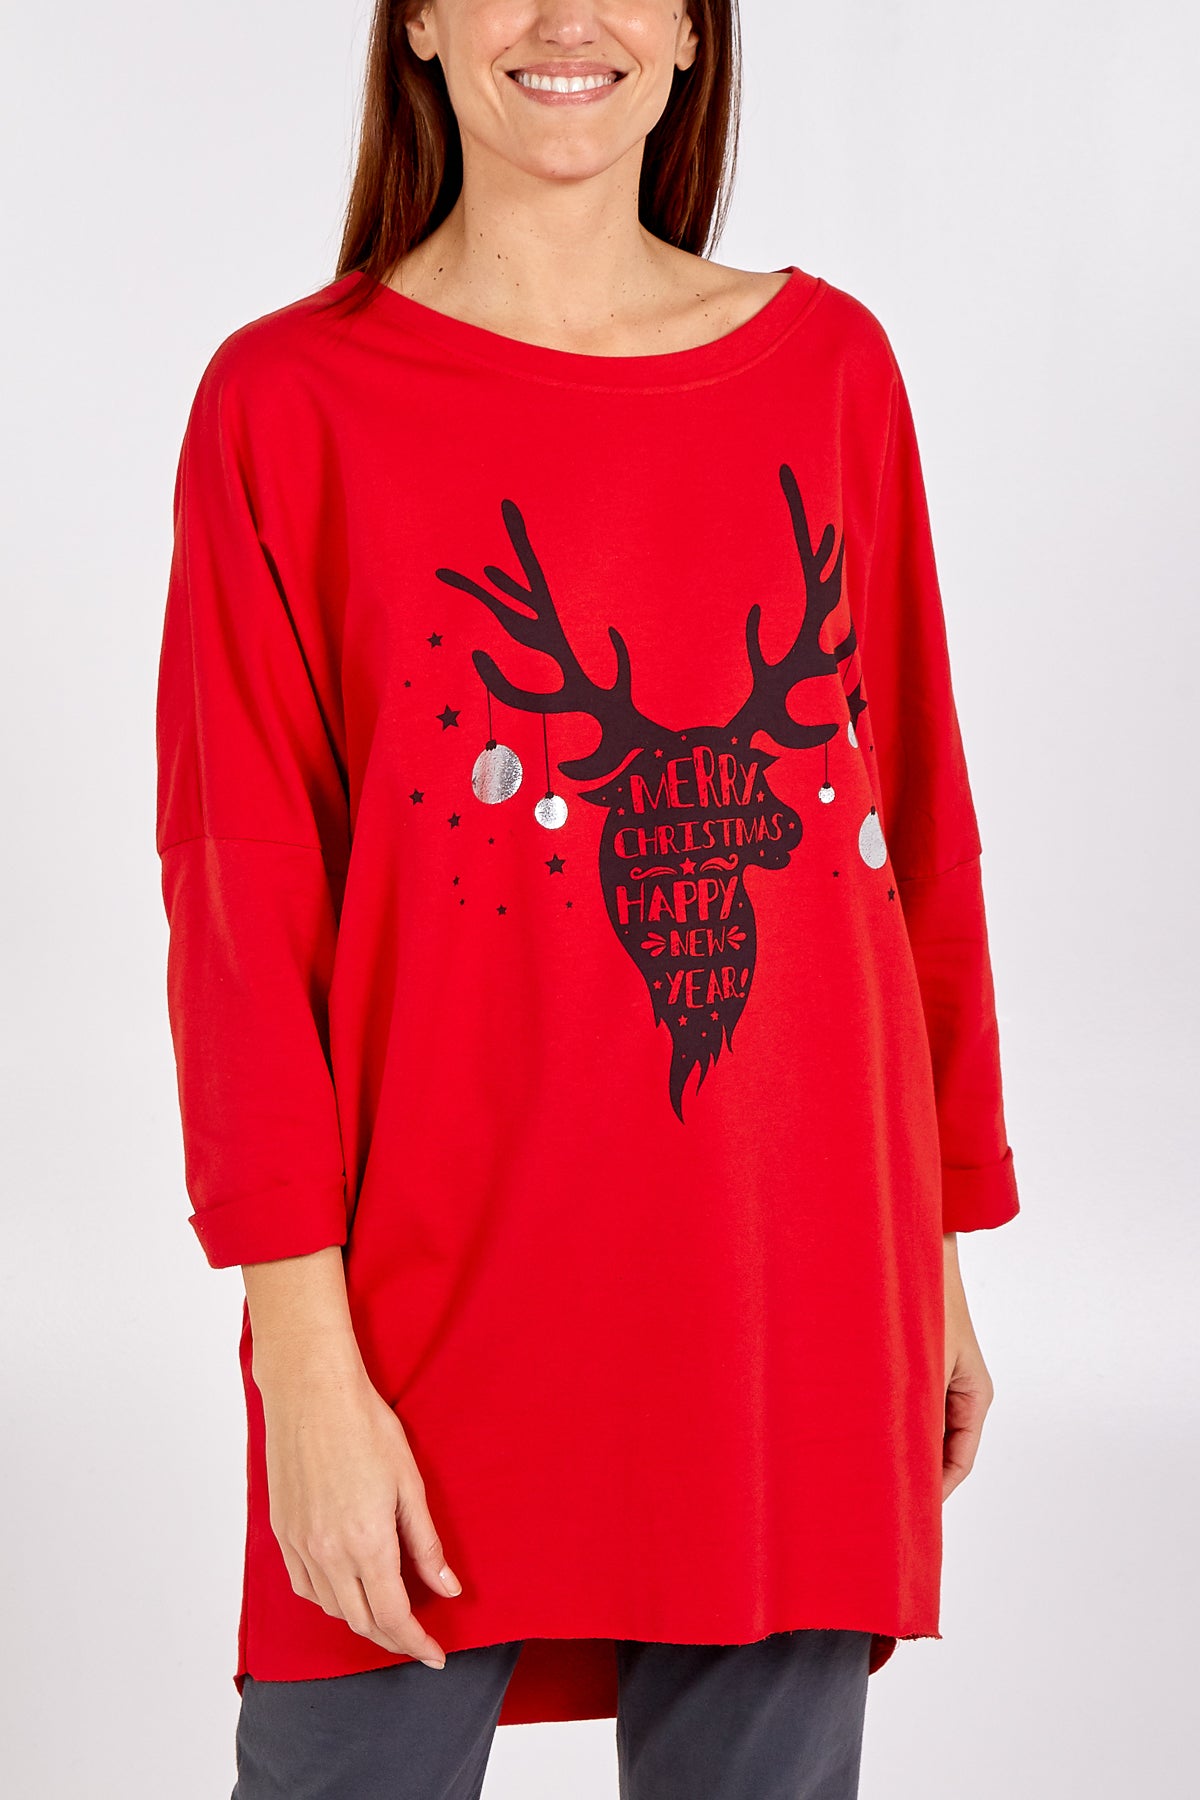 "Merry Christmas And Happy New Year"  Reindeer Print, Round Neck, Oversized Jumper - Made in Italy